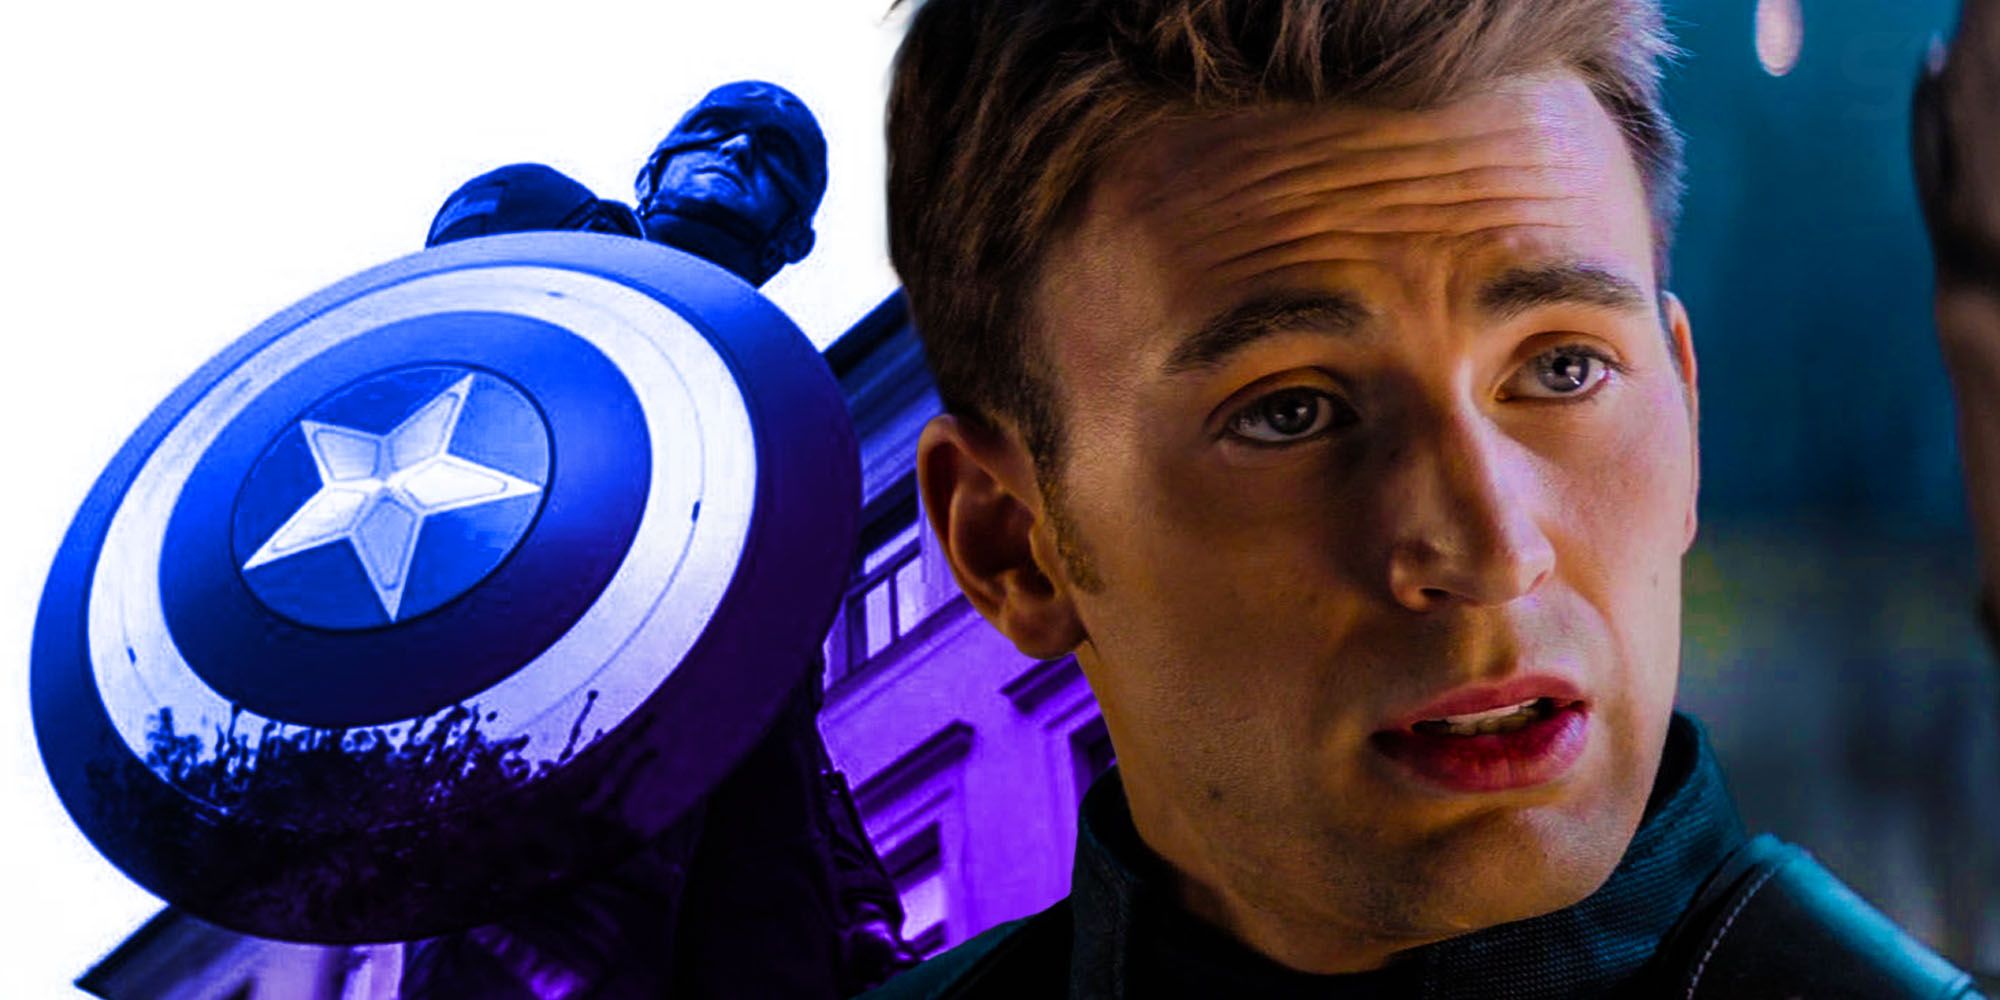 The Mcu Wants You To Forget Steve Rogers Killed People Too